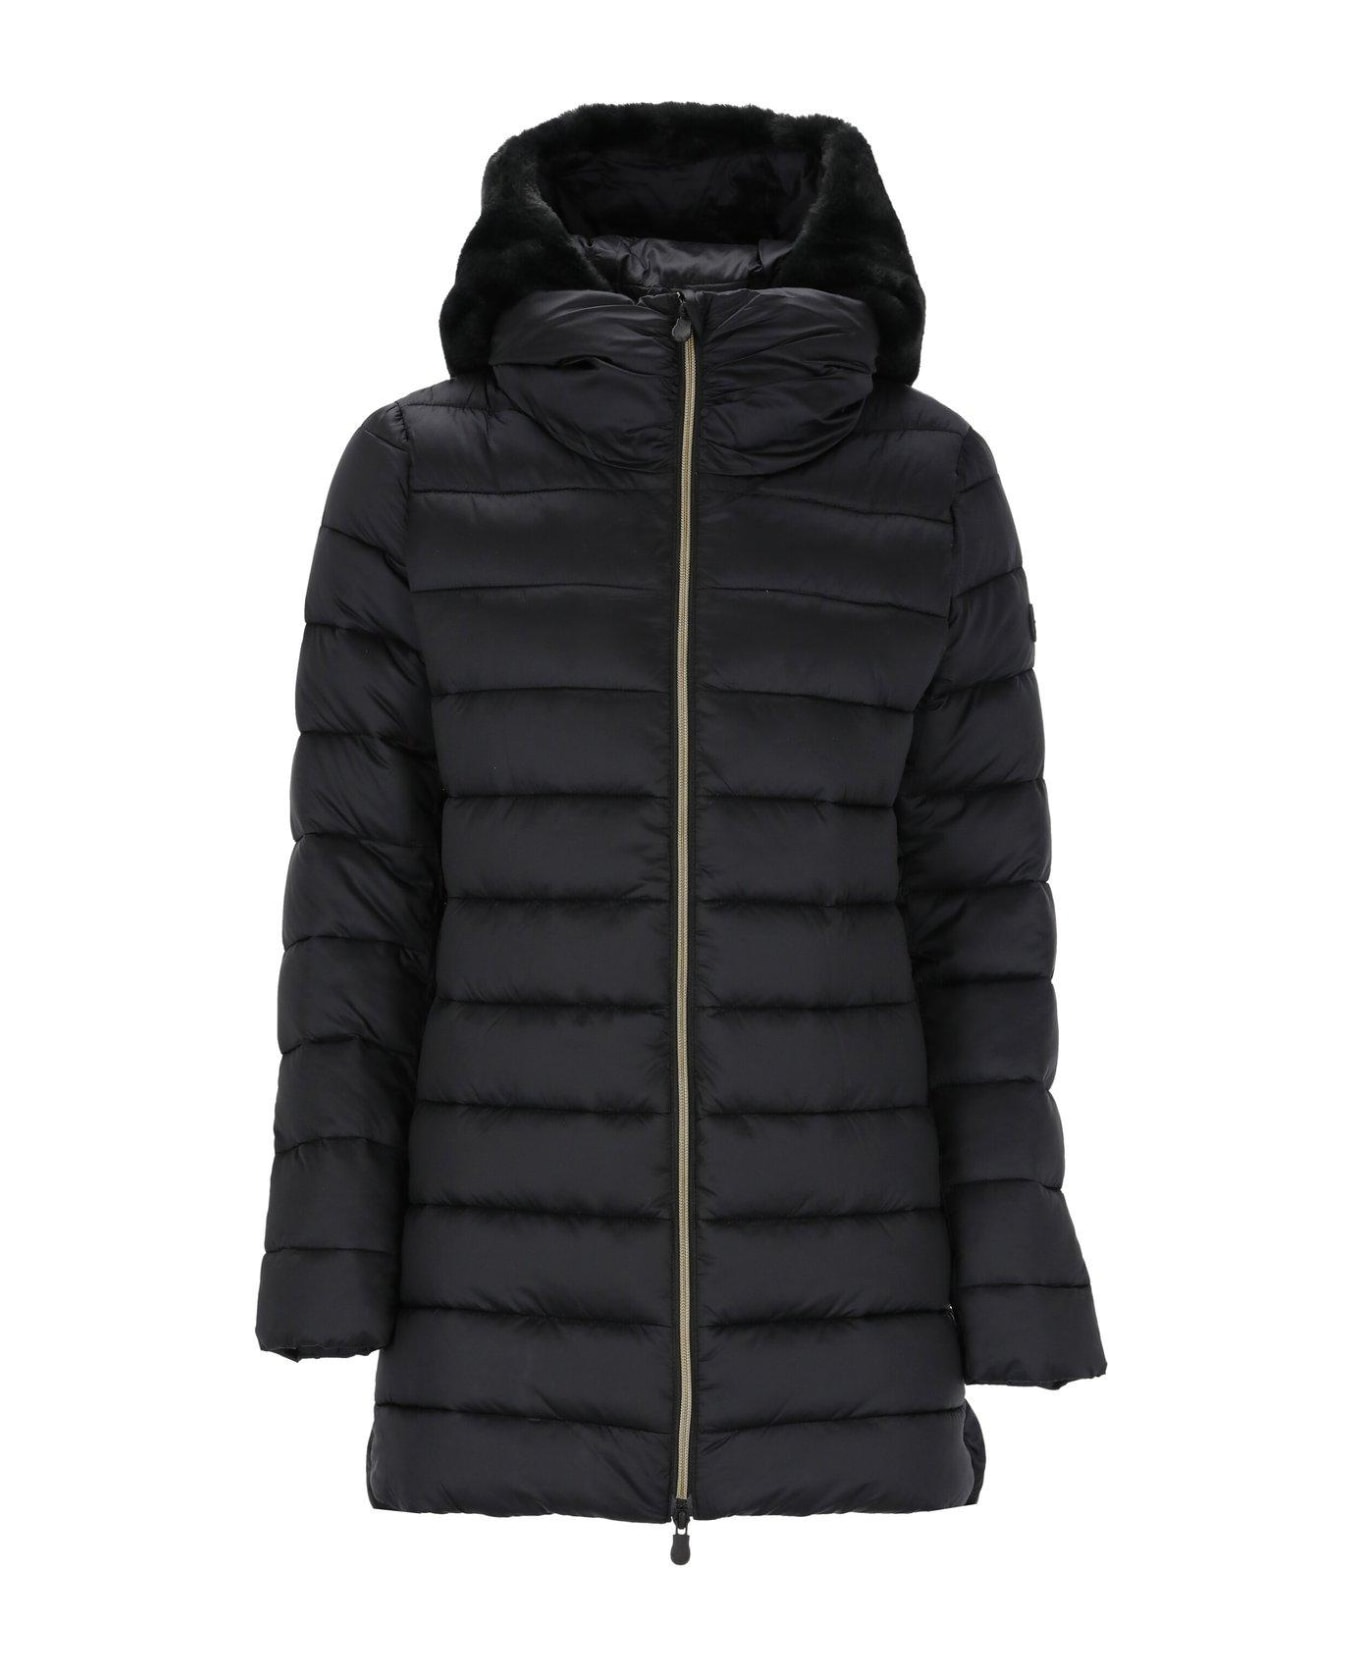 Save the Duck High Neck Hooded Coat - Black コート